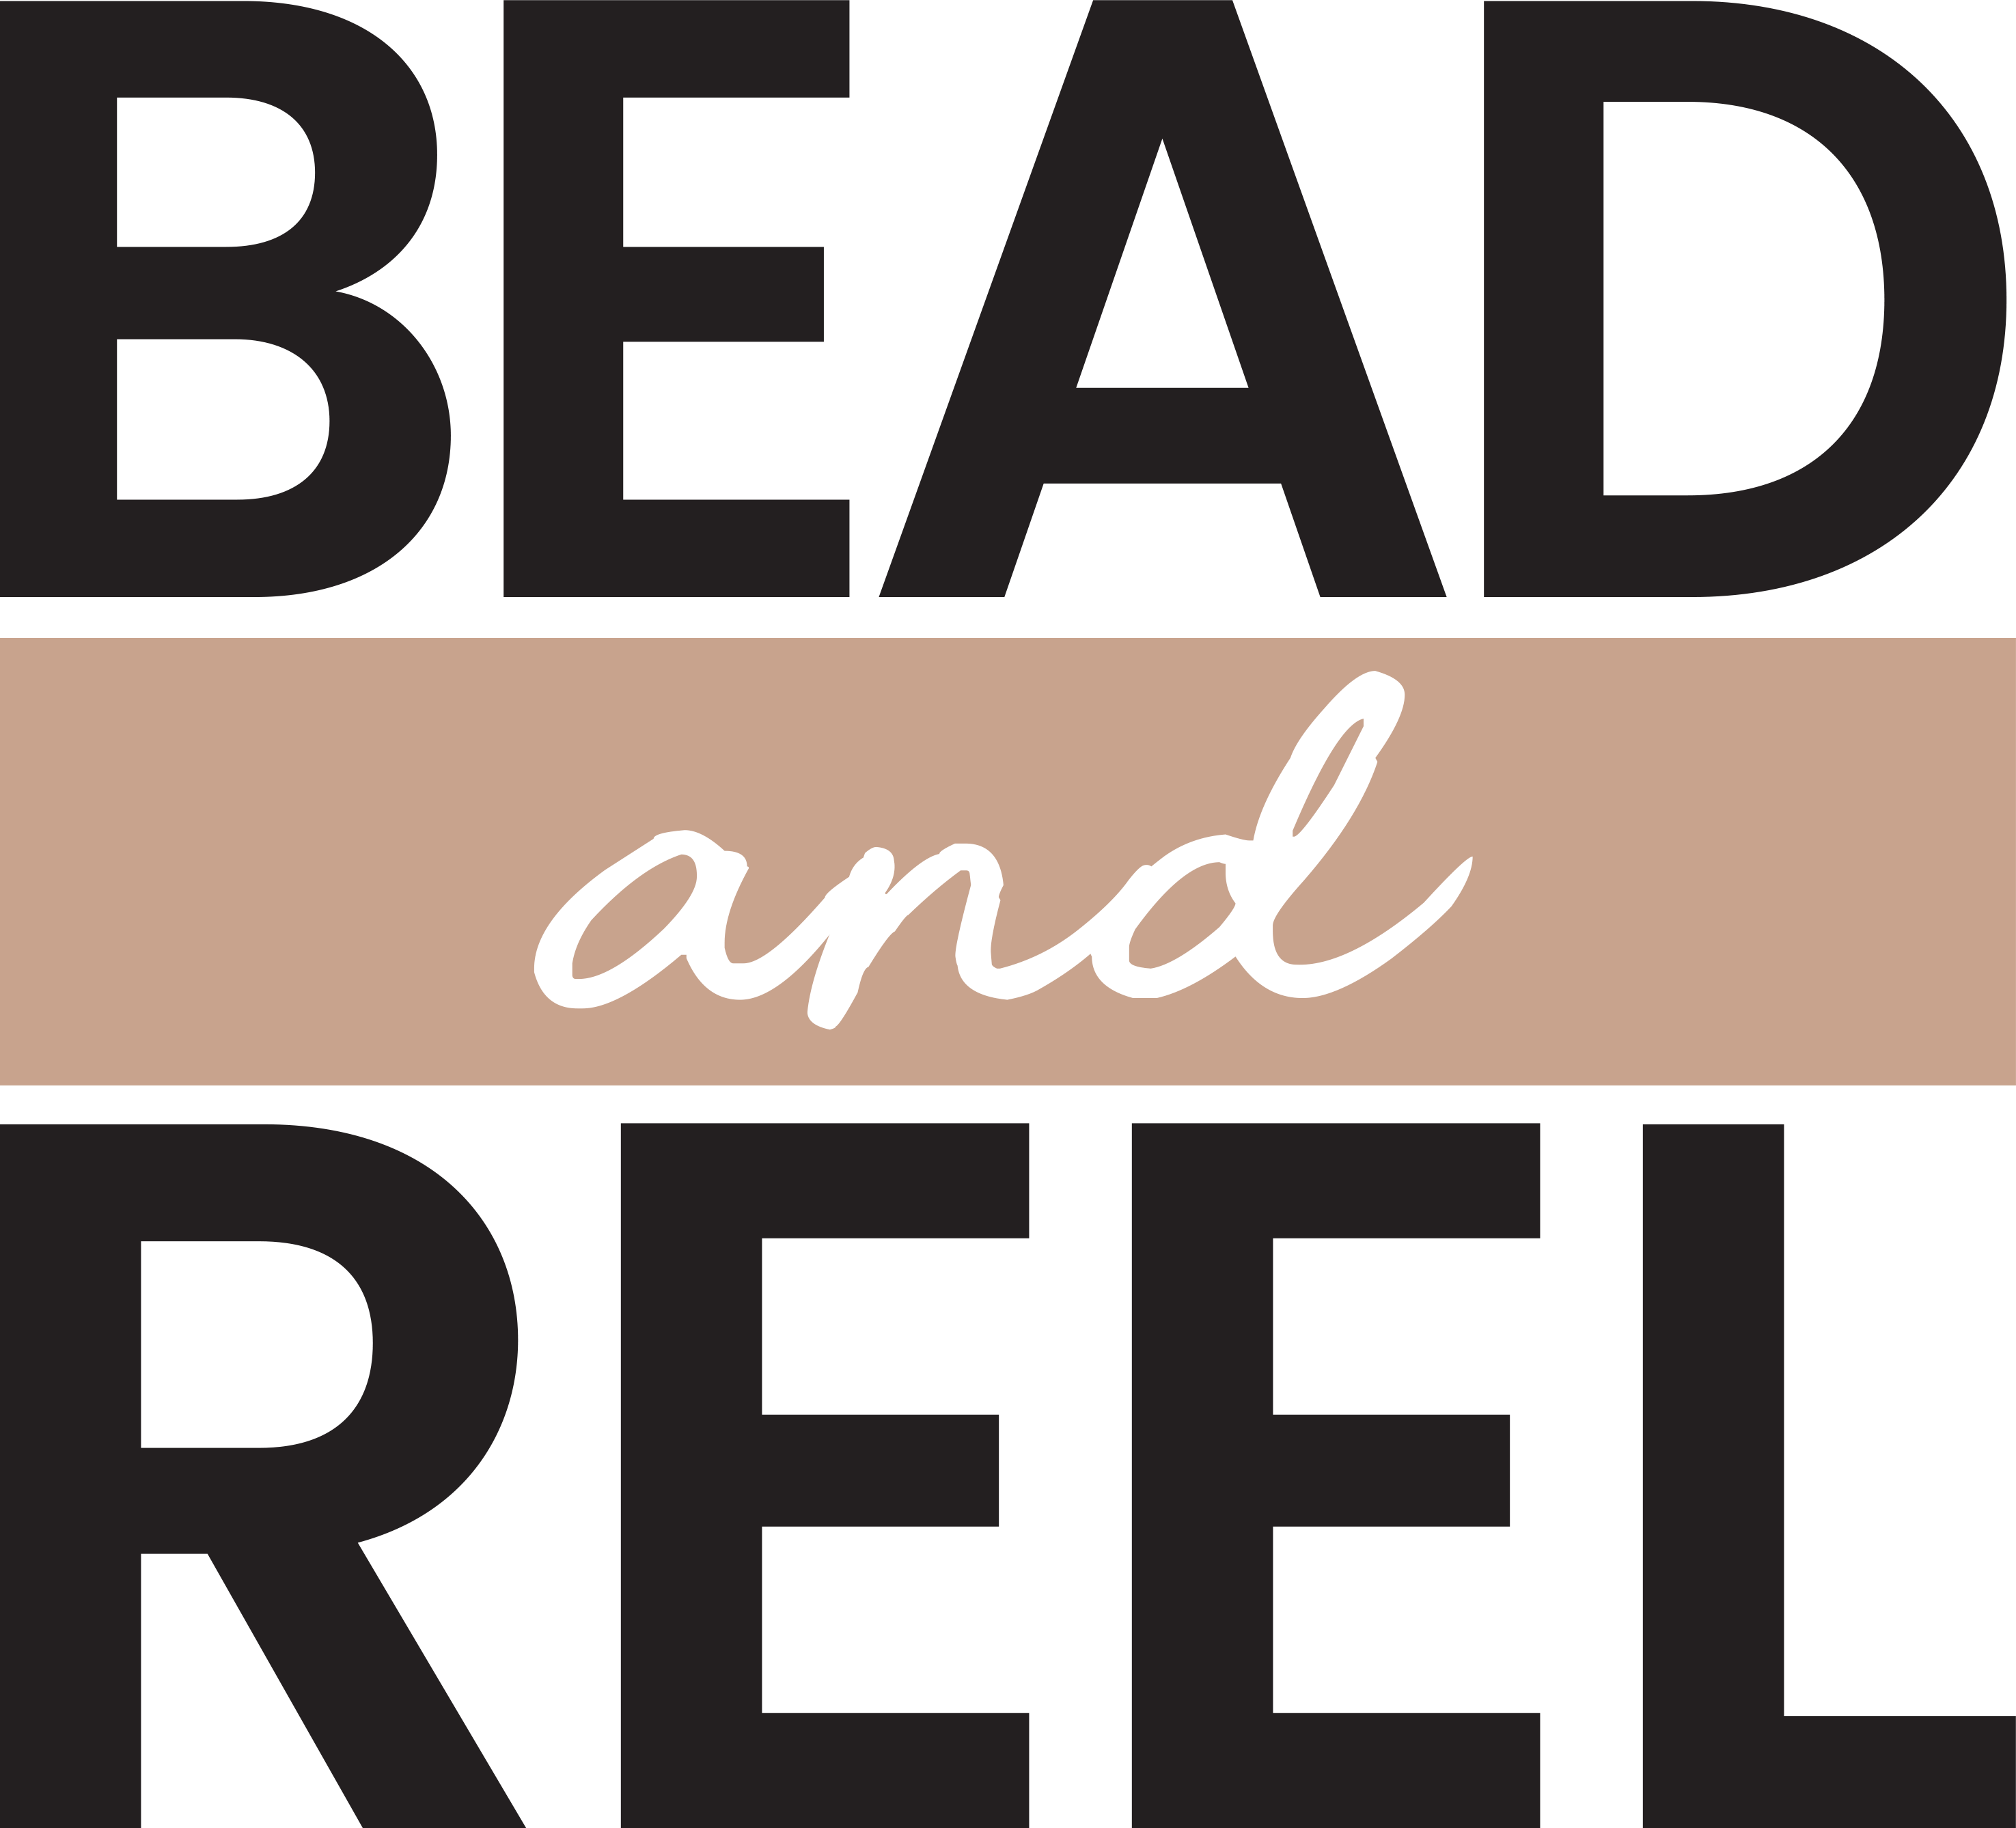 Bead and Reel: Your Ultimate Destination for Ethical Fashion